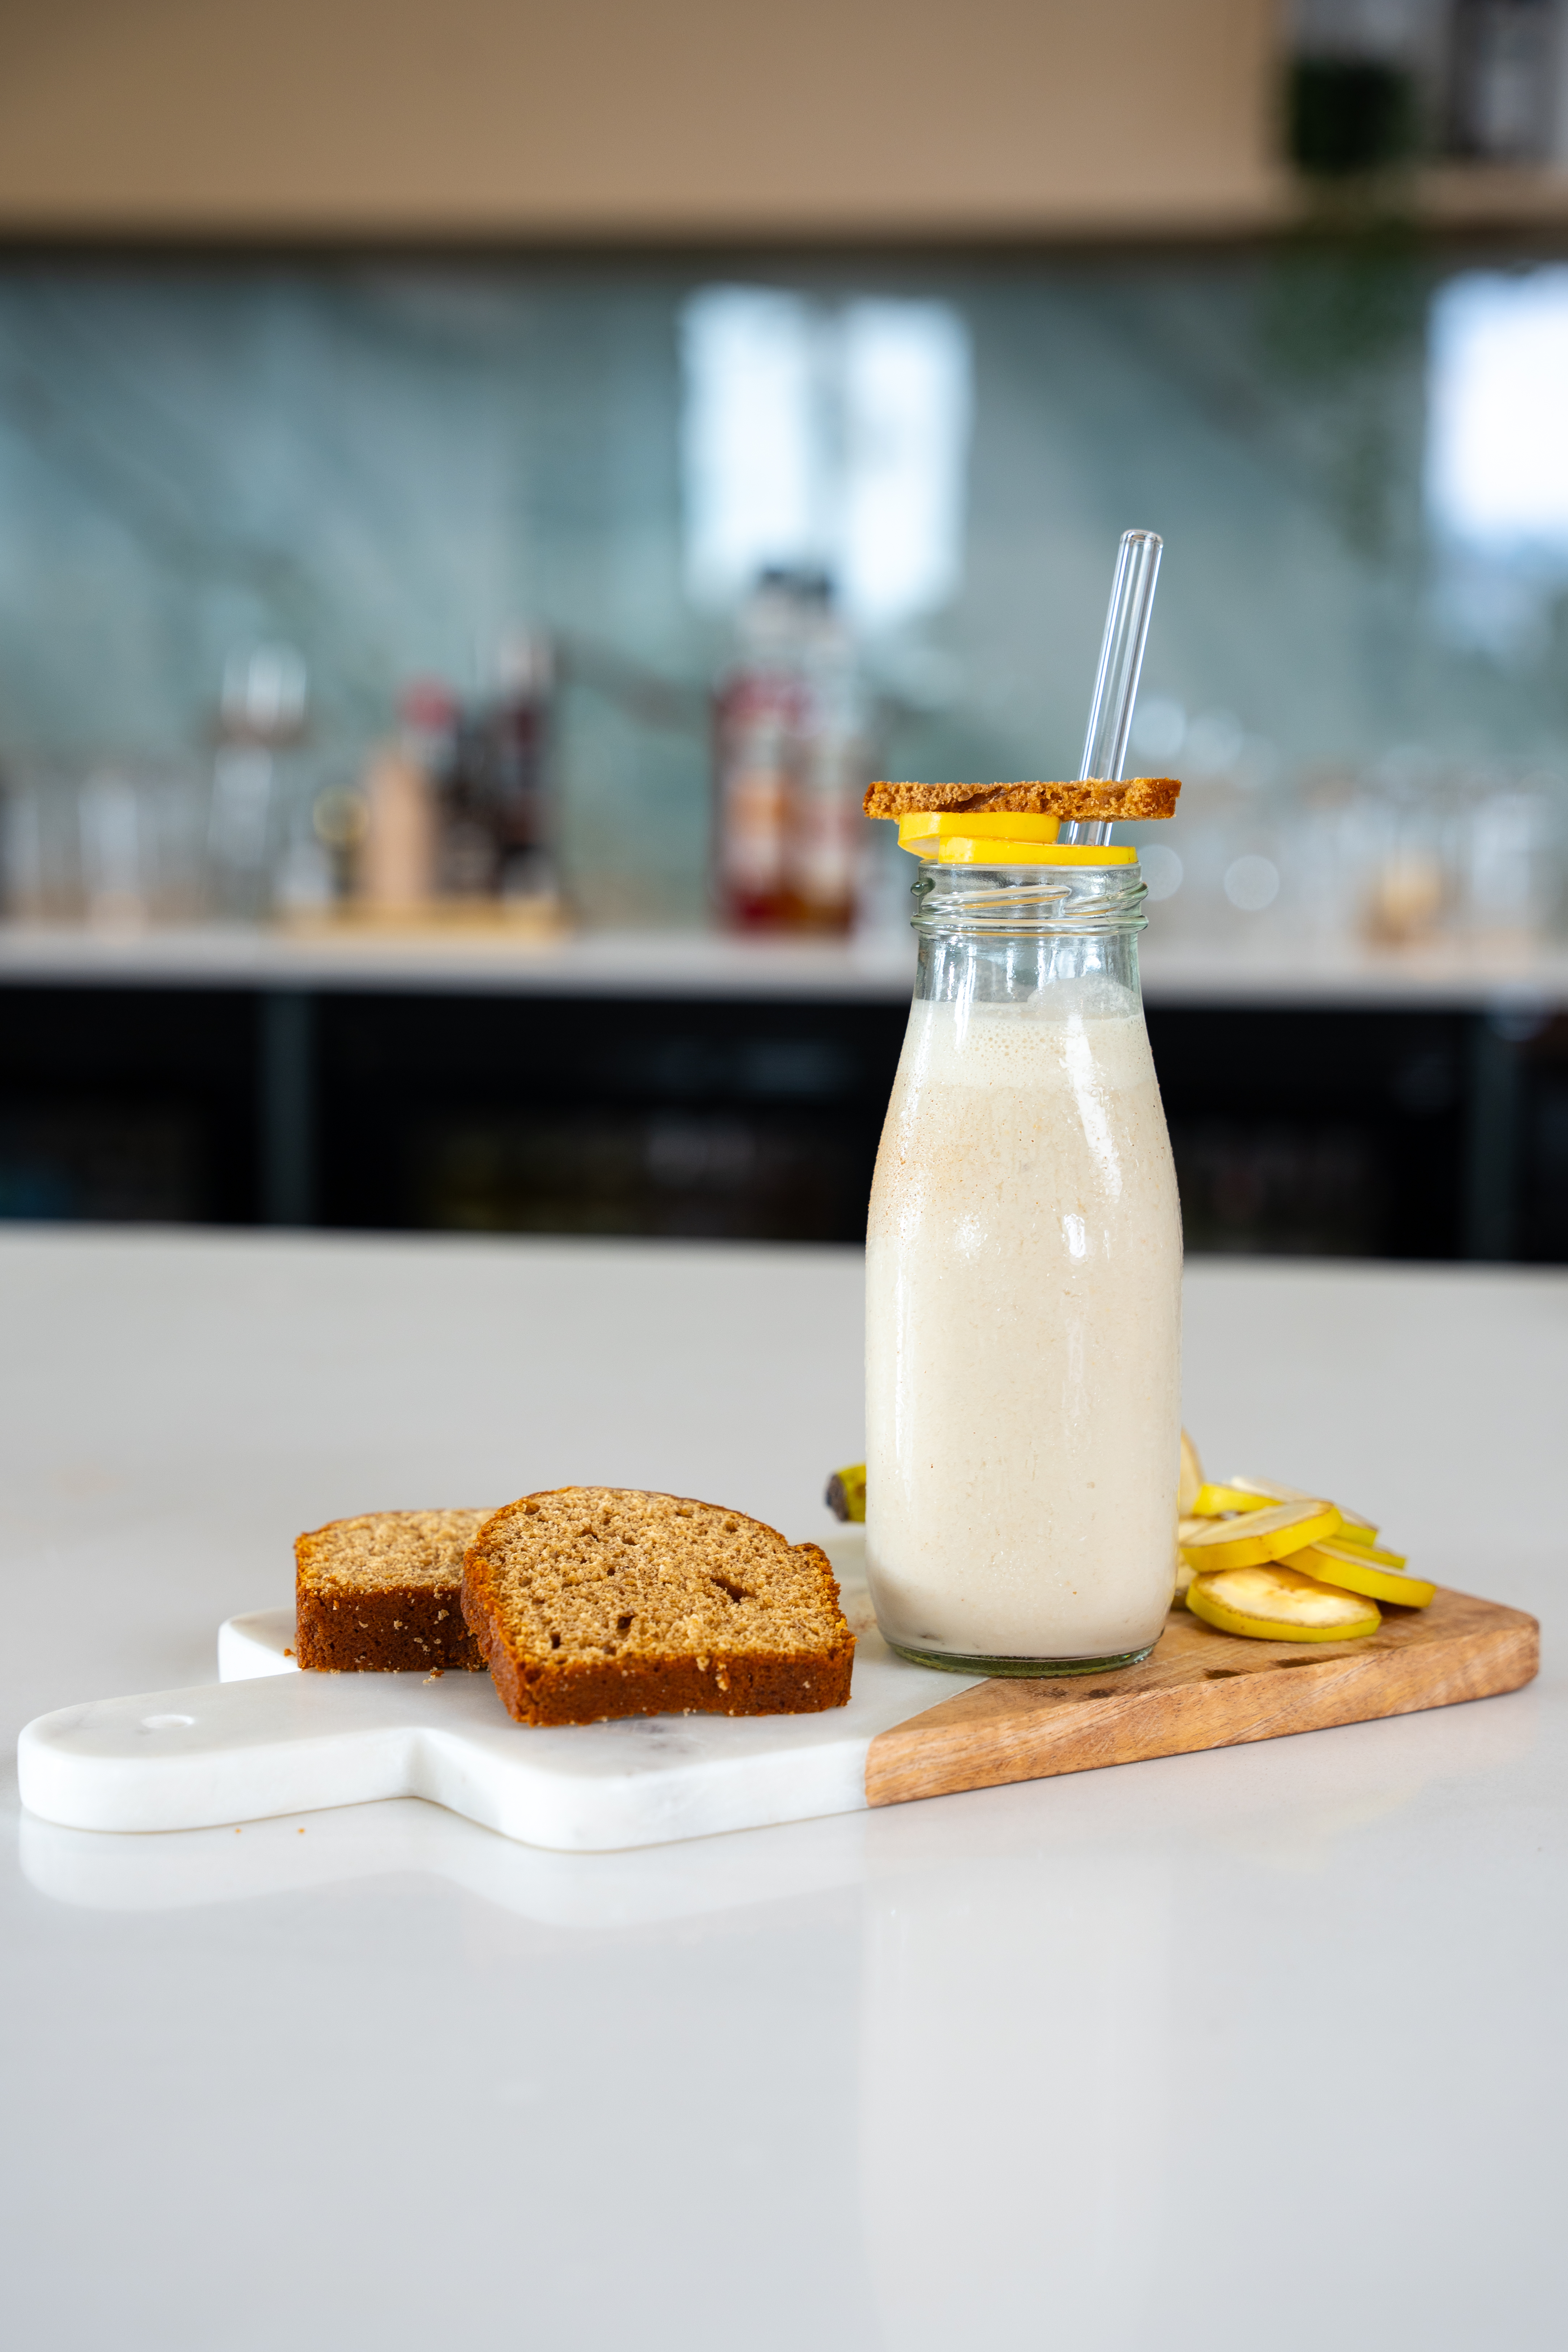 On top of a bar surface, placed on a serving board, there is a milk bottle styled glass filled with a cream coloured smoothie. The smoothie is topped with gingerbread and sliced bananas. Also on the serving tray there are slices of gingerbread. 